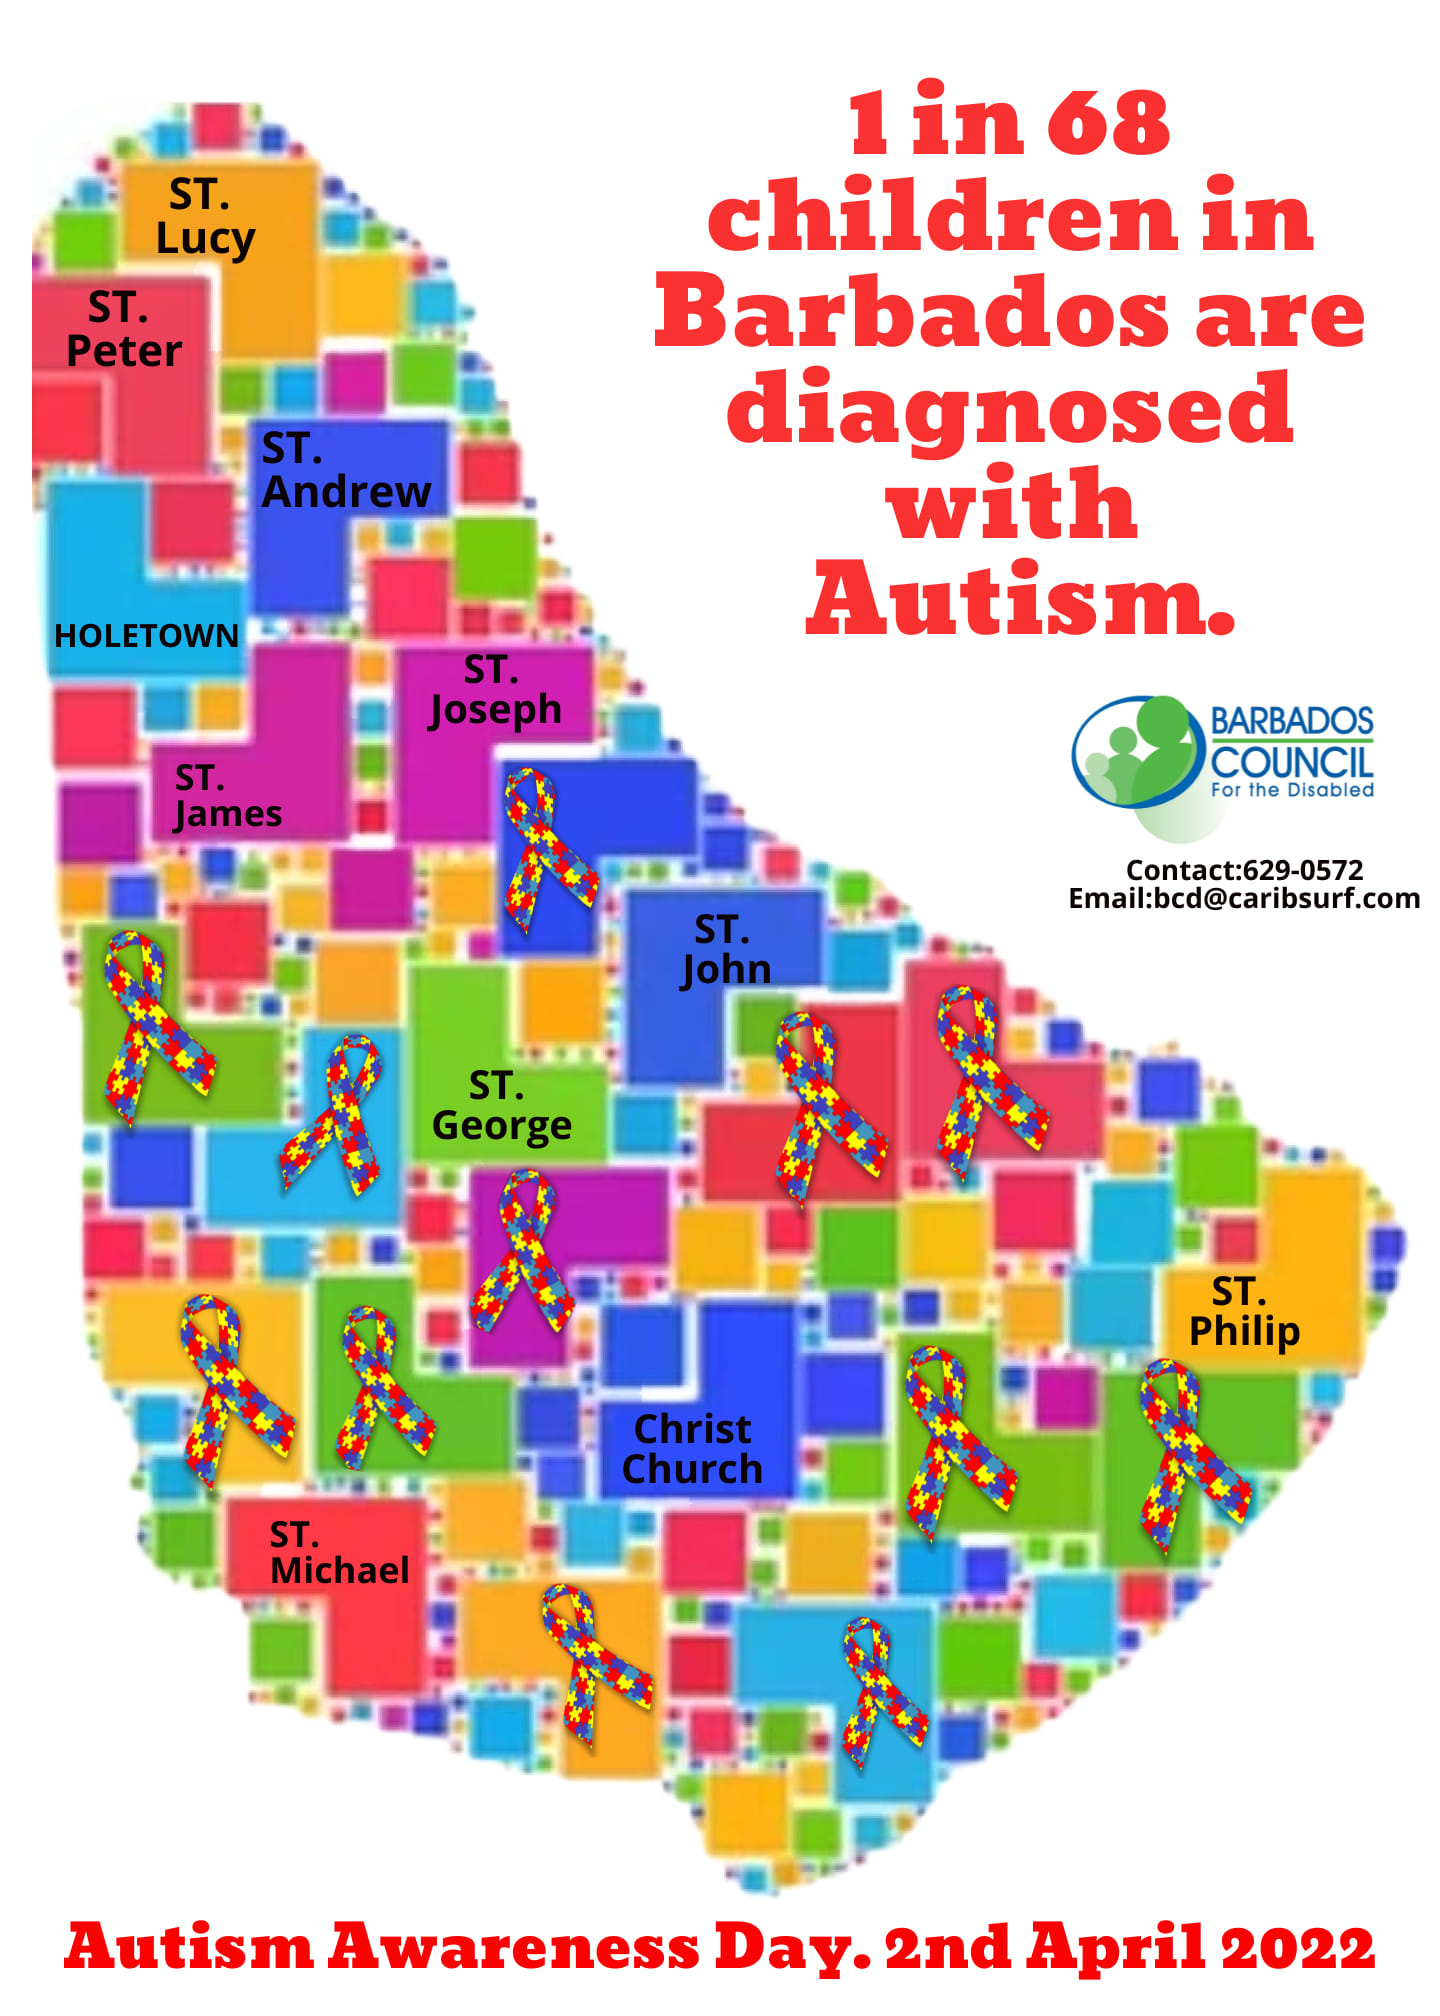 Barbados Council For The Disabled - Associations